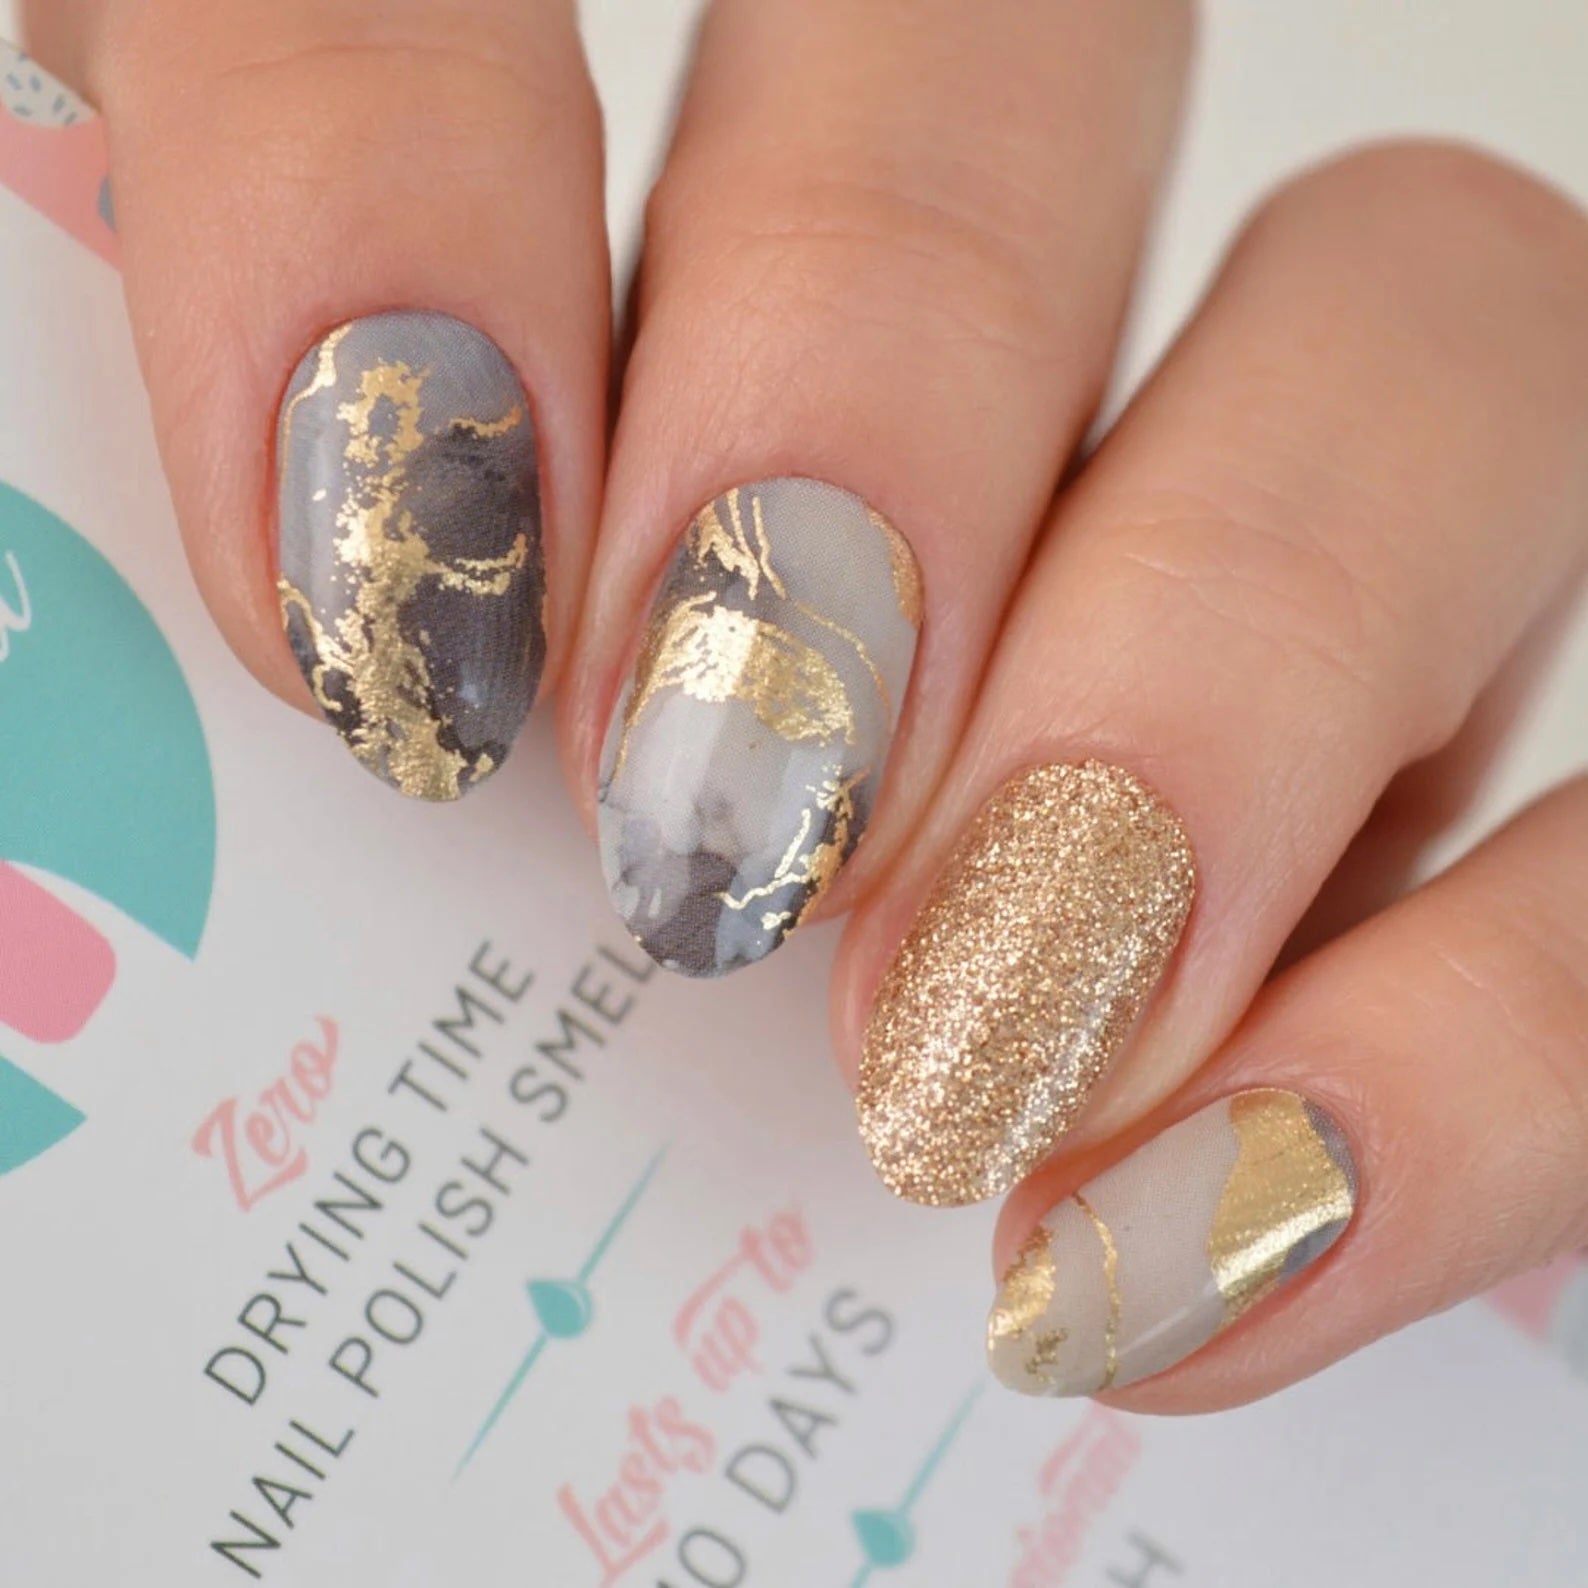 🌤️The perfect summer nails with fun, muted colors of warm yellow and sky  blue, topped with cute botanicals and silver foil. ✨ What... | Instagram